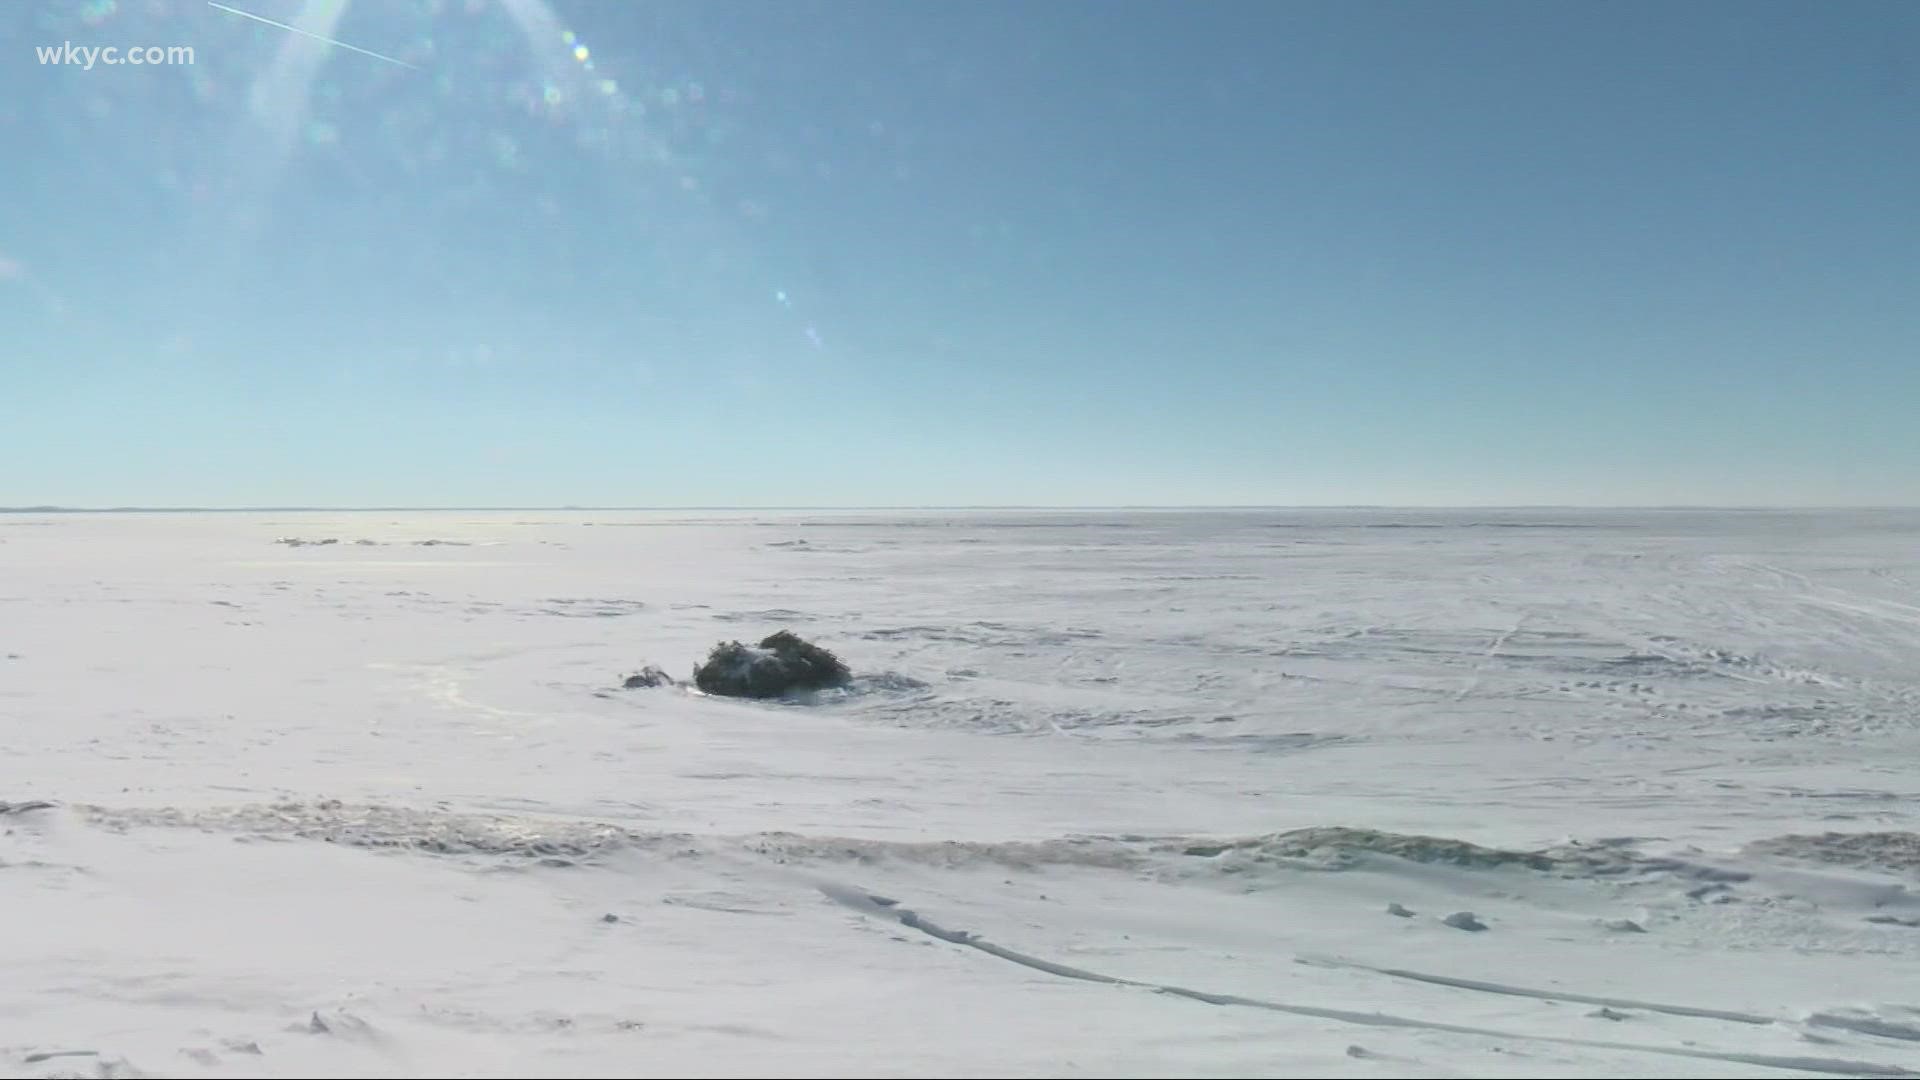 According to the U.S. Coast Guard Great Lakes, the individuals were on a floe that broke off.